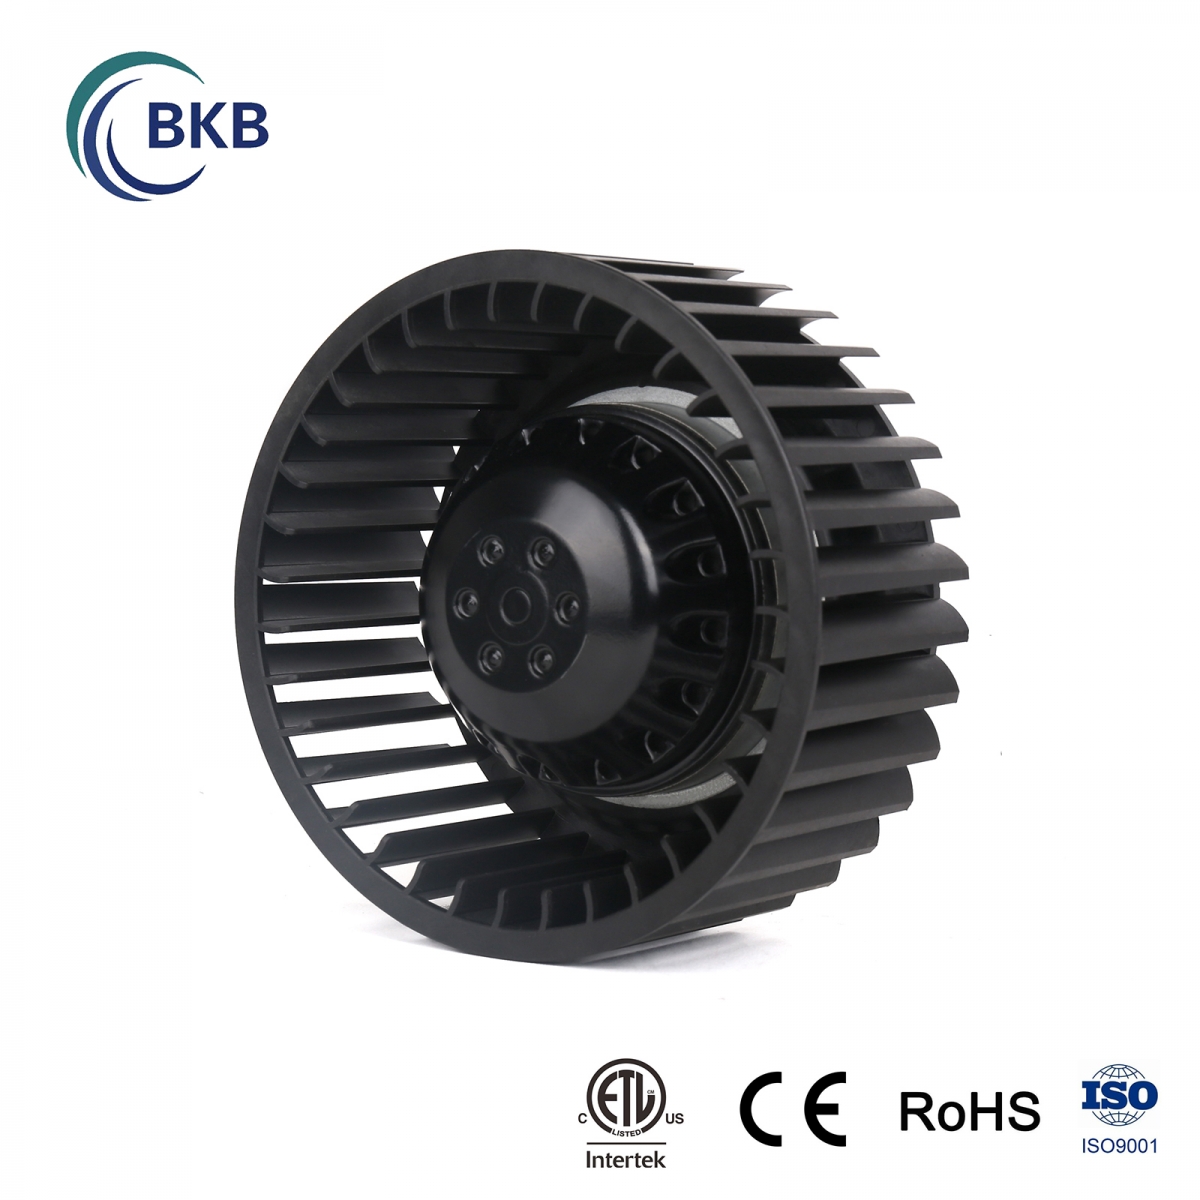 HYDROPONIC EC FAN / DC FAN Forward curved centrifugal fans Φ146 ETL listed MANUFACTURER IN CHINA-SUNLIGHT BLOWER,Centrifugal Fans, Inline Fans,Motors,Backward curved centrifugal fans ,Forward curved centrifugal fans ,inlet fans, EC fans